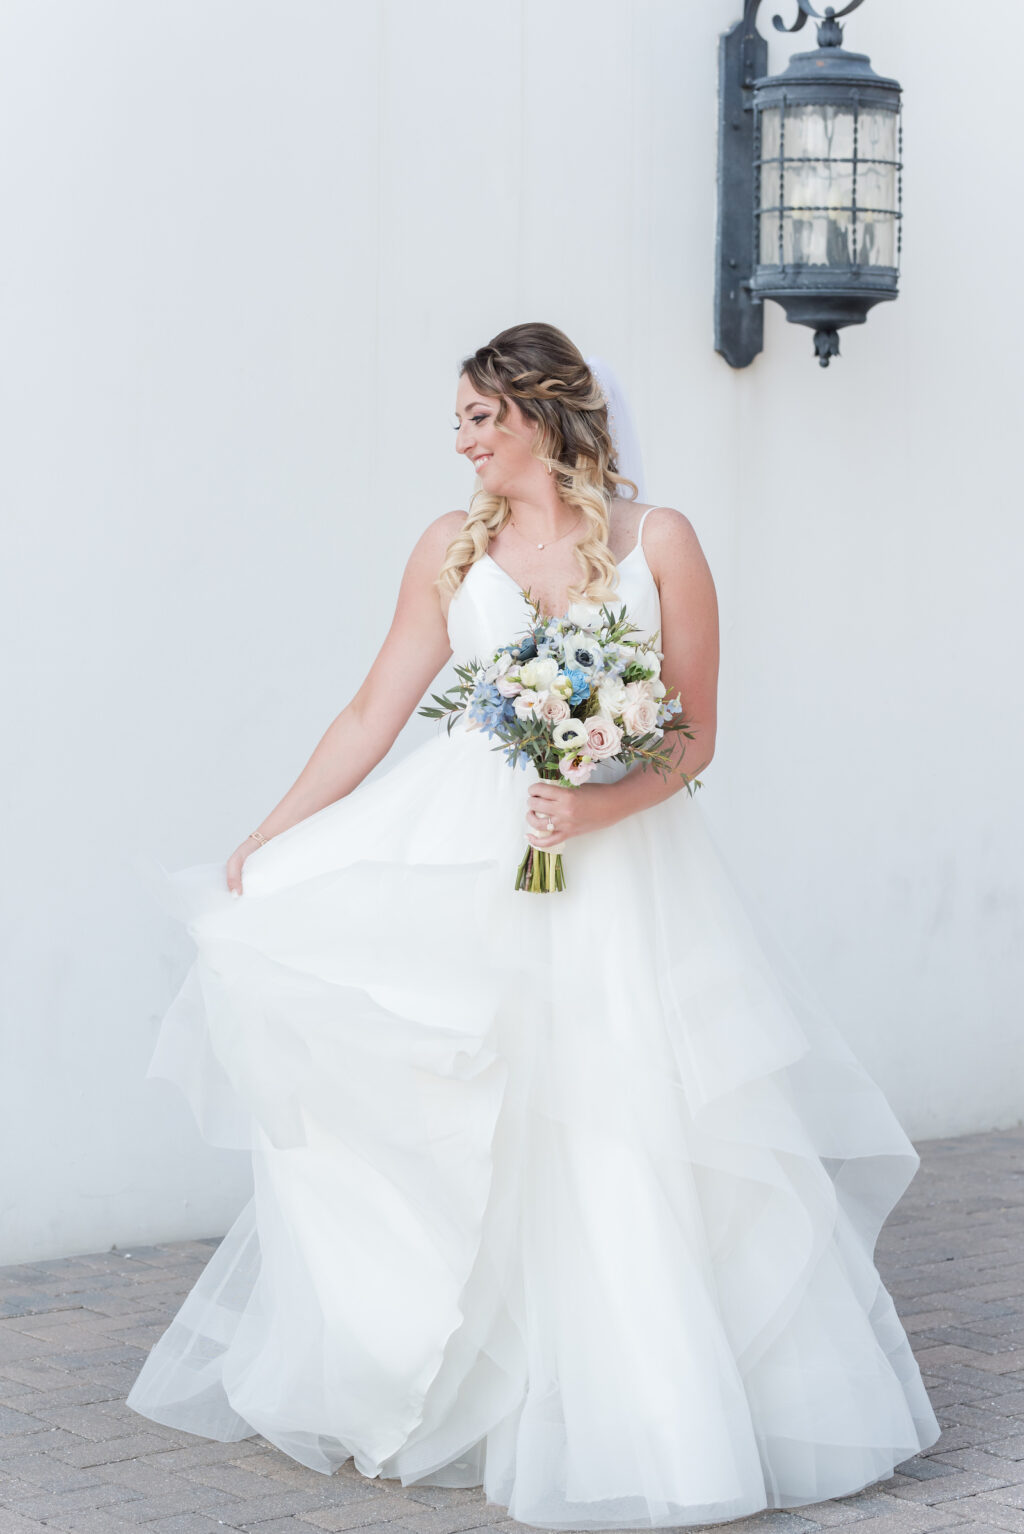 Bride in Tulle Ballgown with Bridal Bouquet with Blue and Cream Florals | Ashley Renee Bridal | Adore Bridal Hair & Makeup